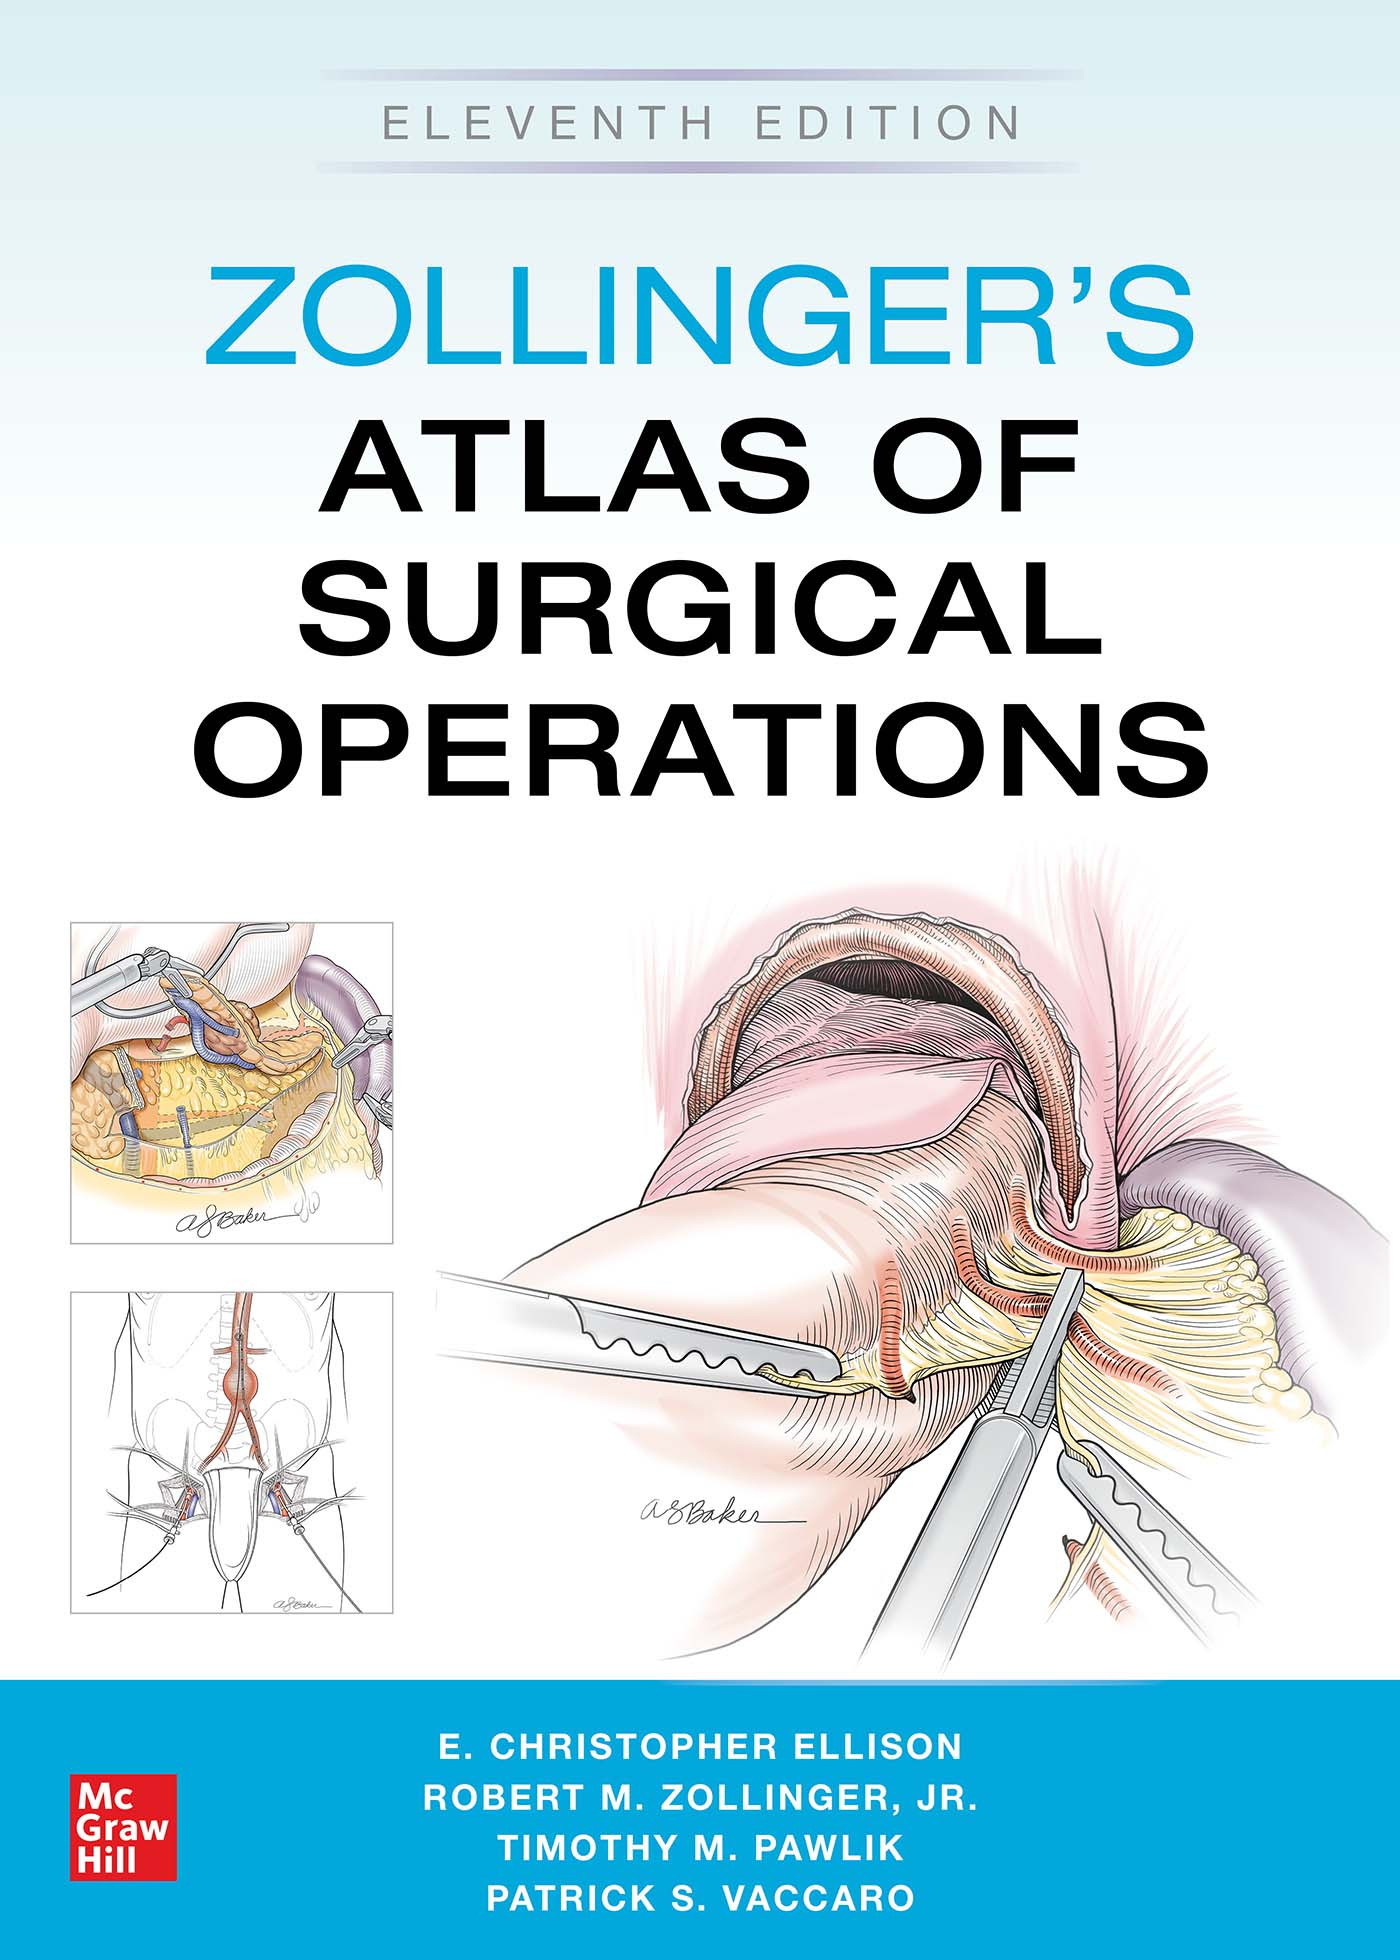 Zollinger's Atlas of Surgical Operations, 11th ed.